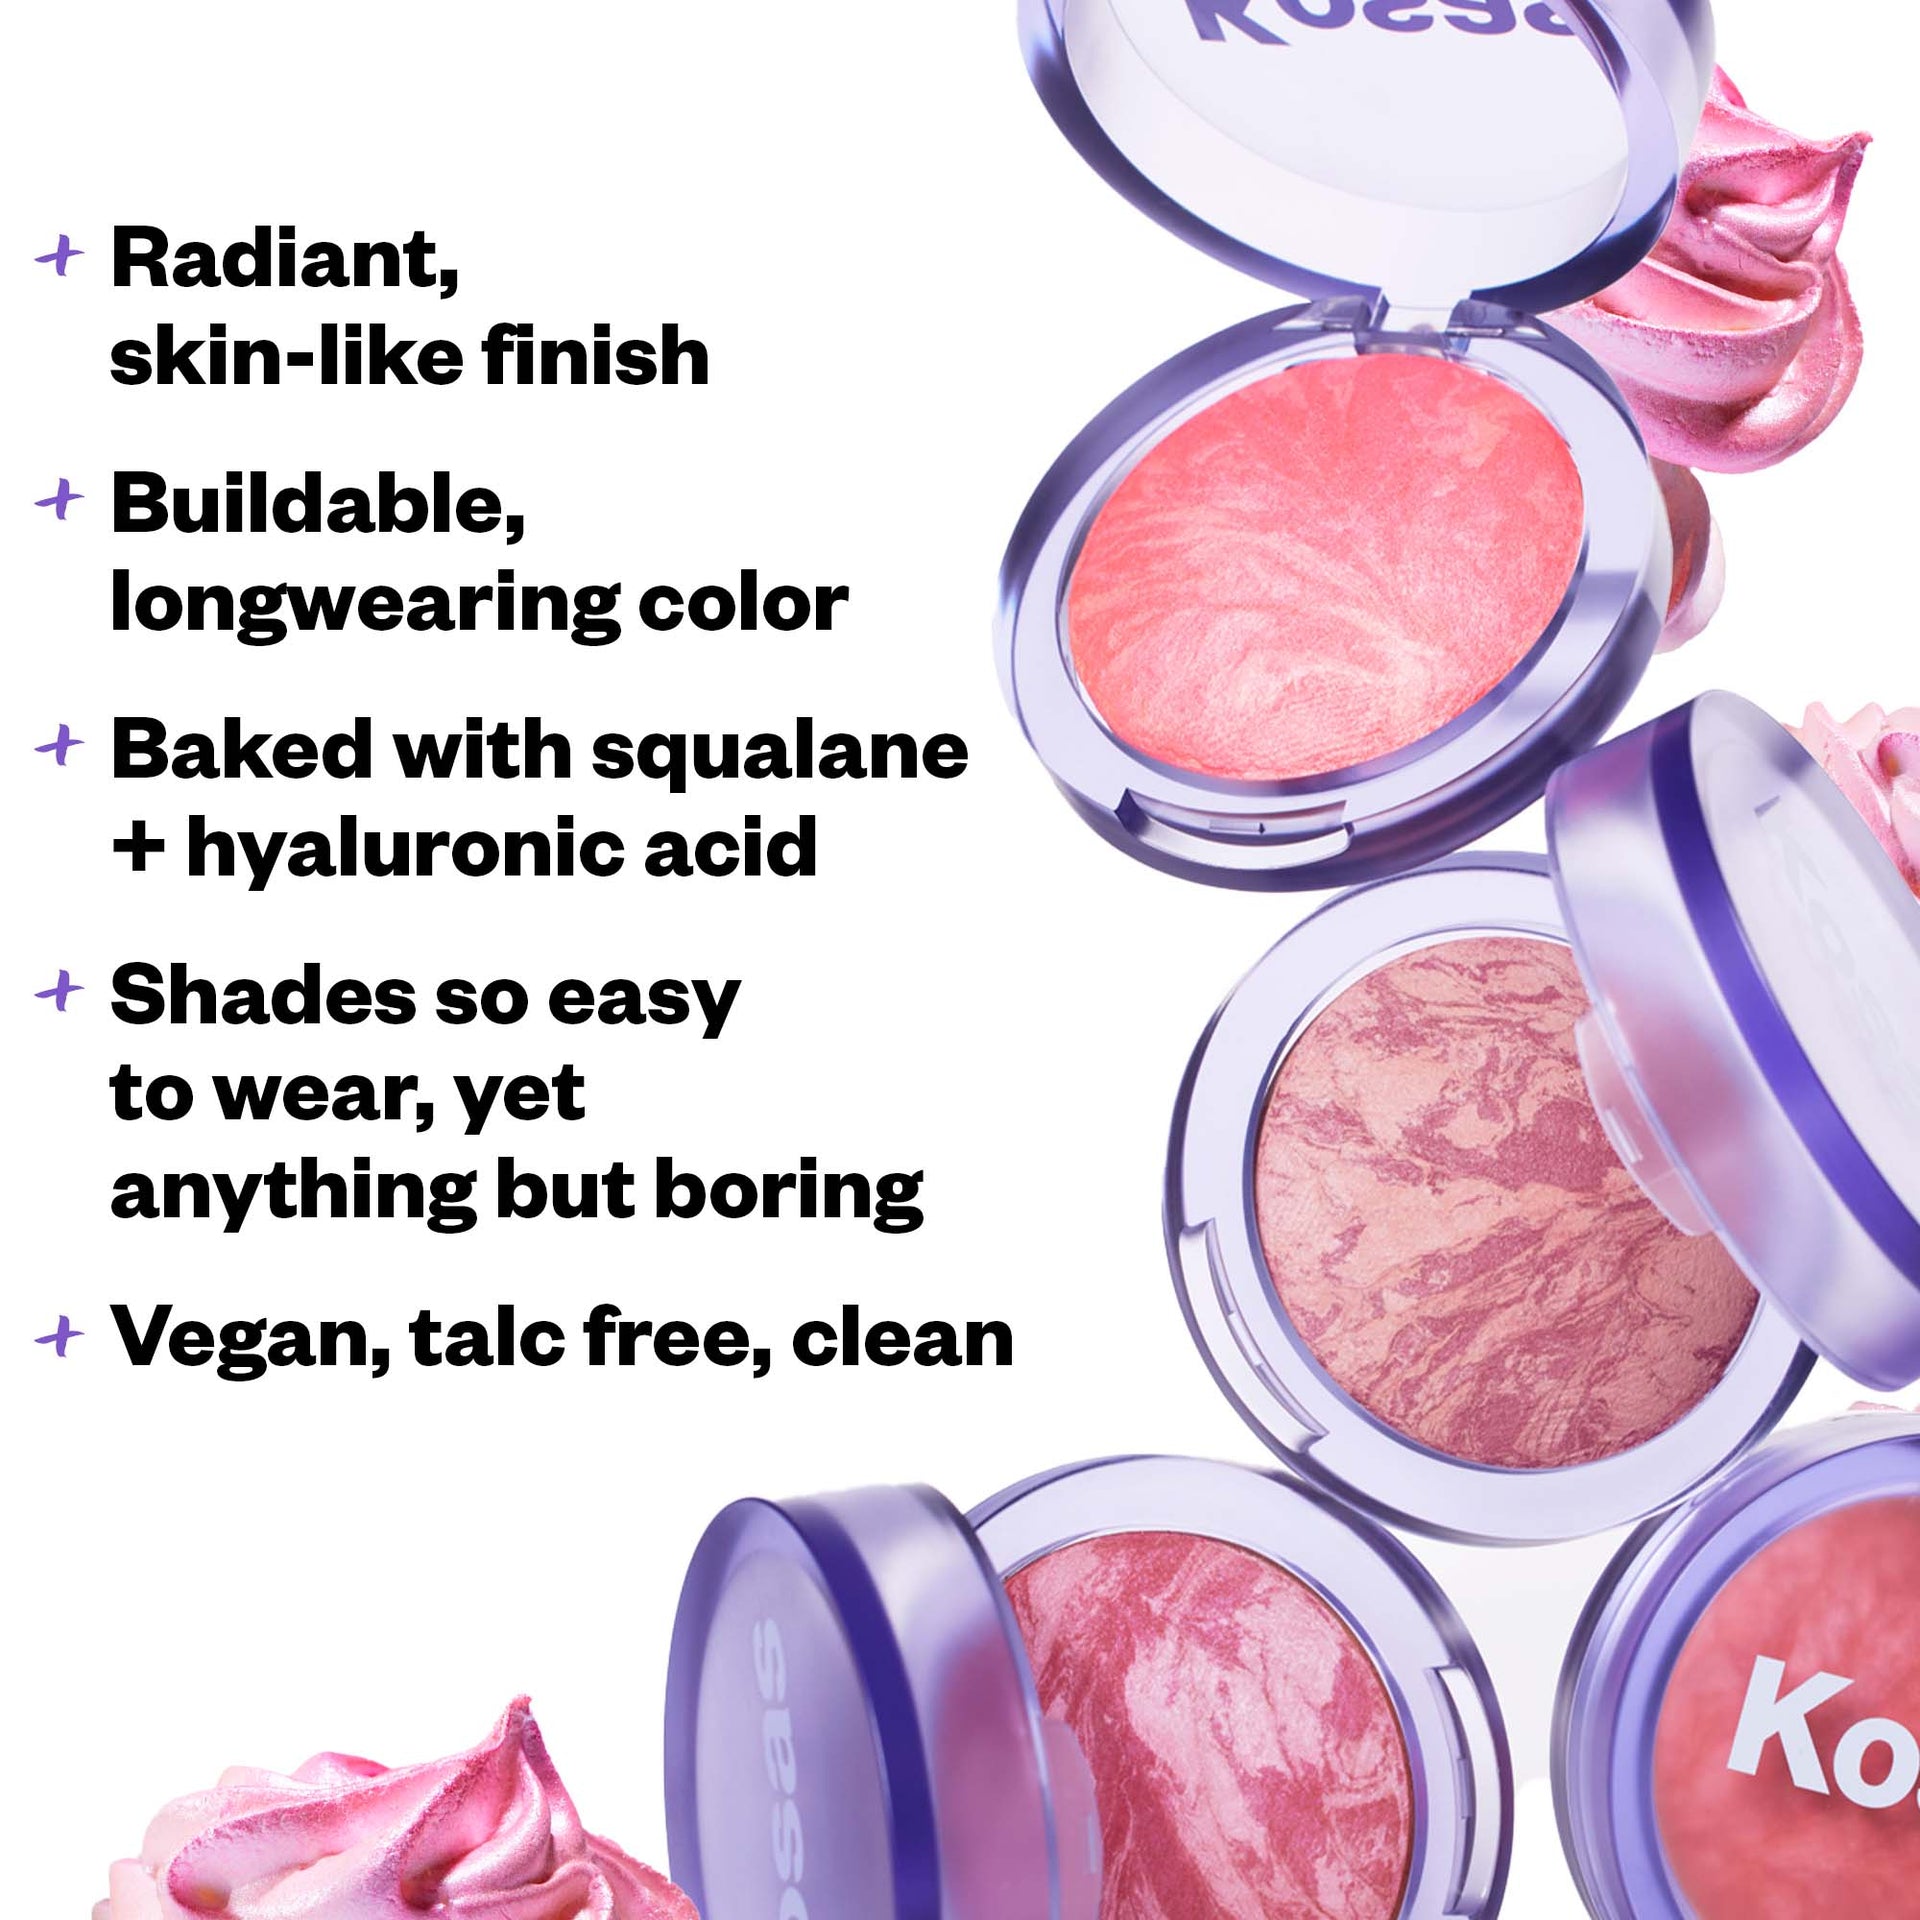 Radiant skin-like finish, buildable longwearing color, baked with squalene + hyaluronic acid, shades so easy to wear, yet anything but boring, vegan, talc free, clean